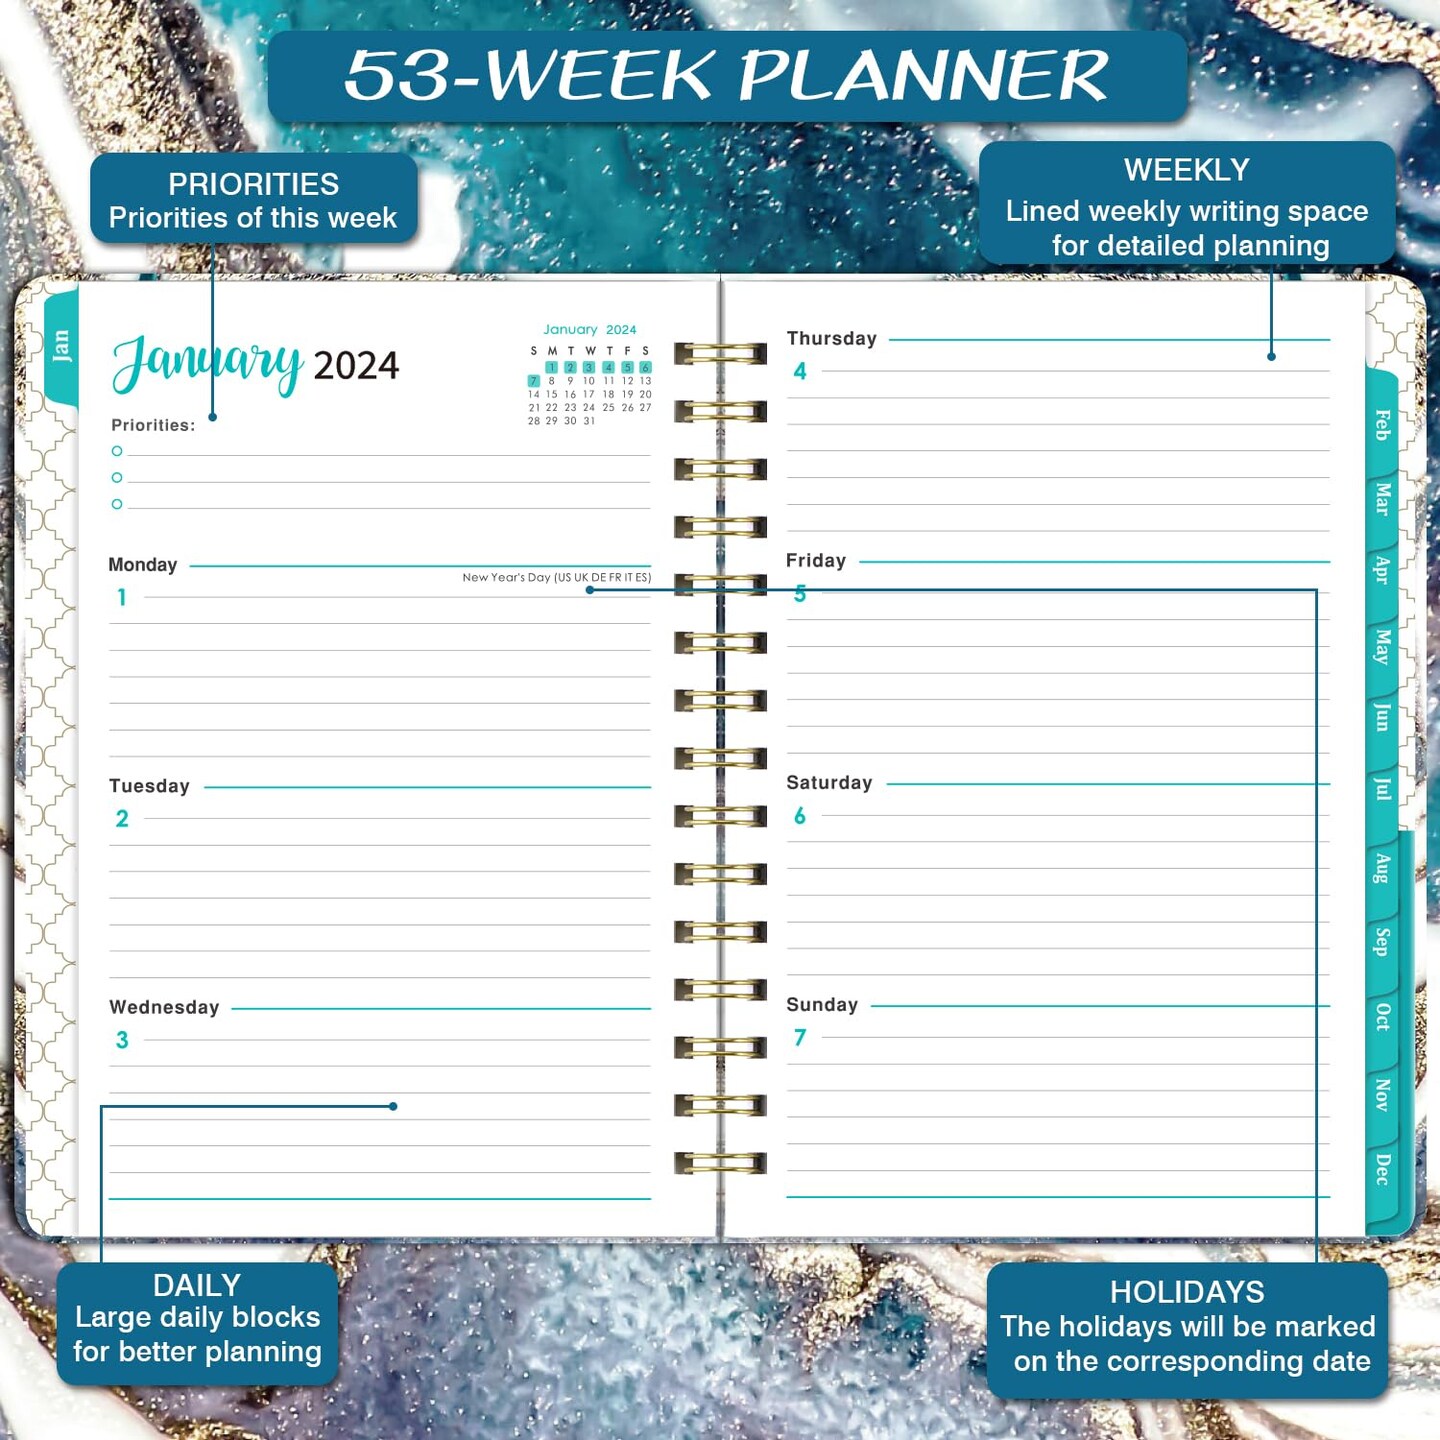 2024 Planner - 2024 Planner Weekly and Monthly, 2024 Calendar Planner from Jan 2024 to Dec 2024, Planner 2024 with, Inner Pocket, Tabs